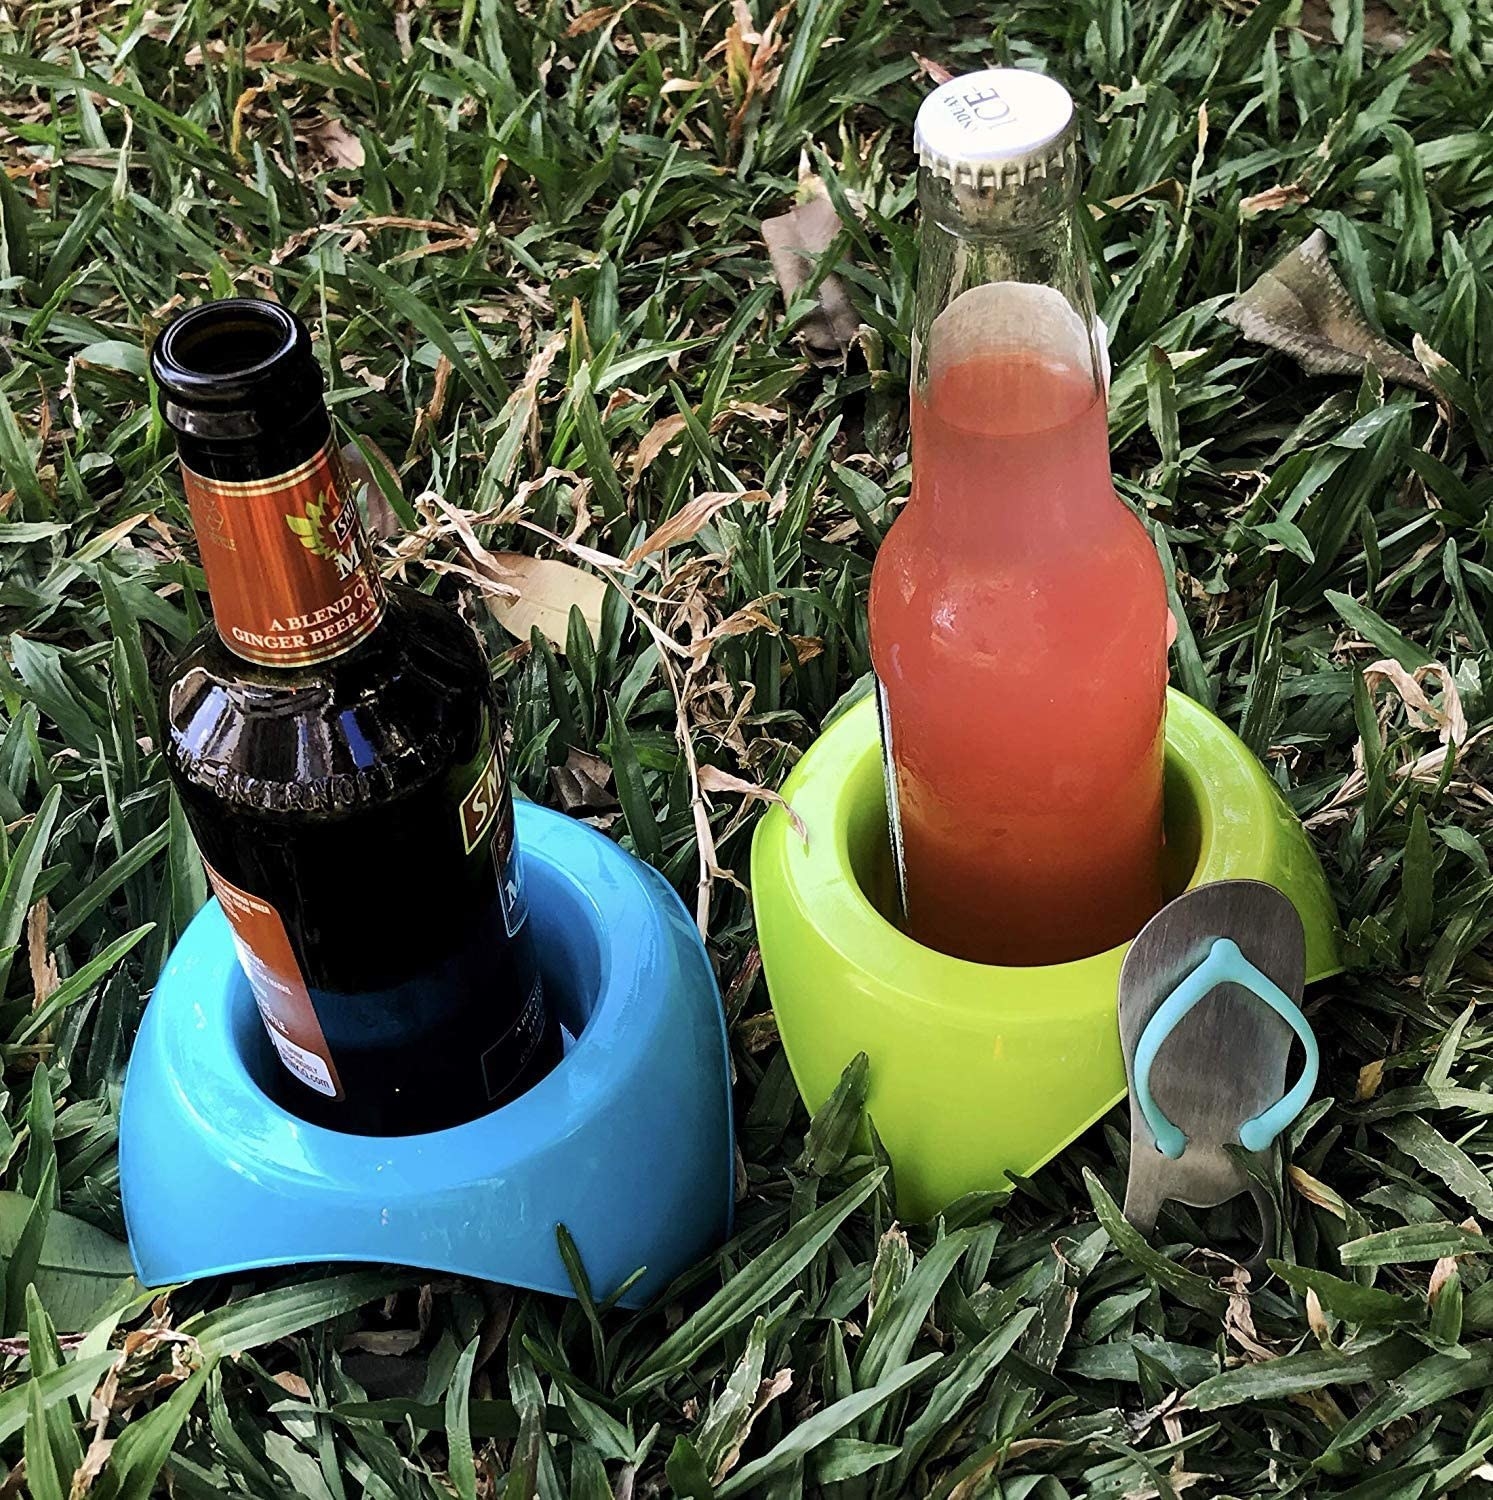 A pair of bottles in two cup holders in some grass